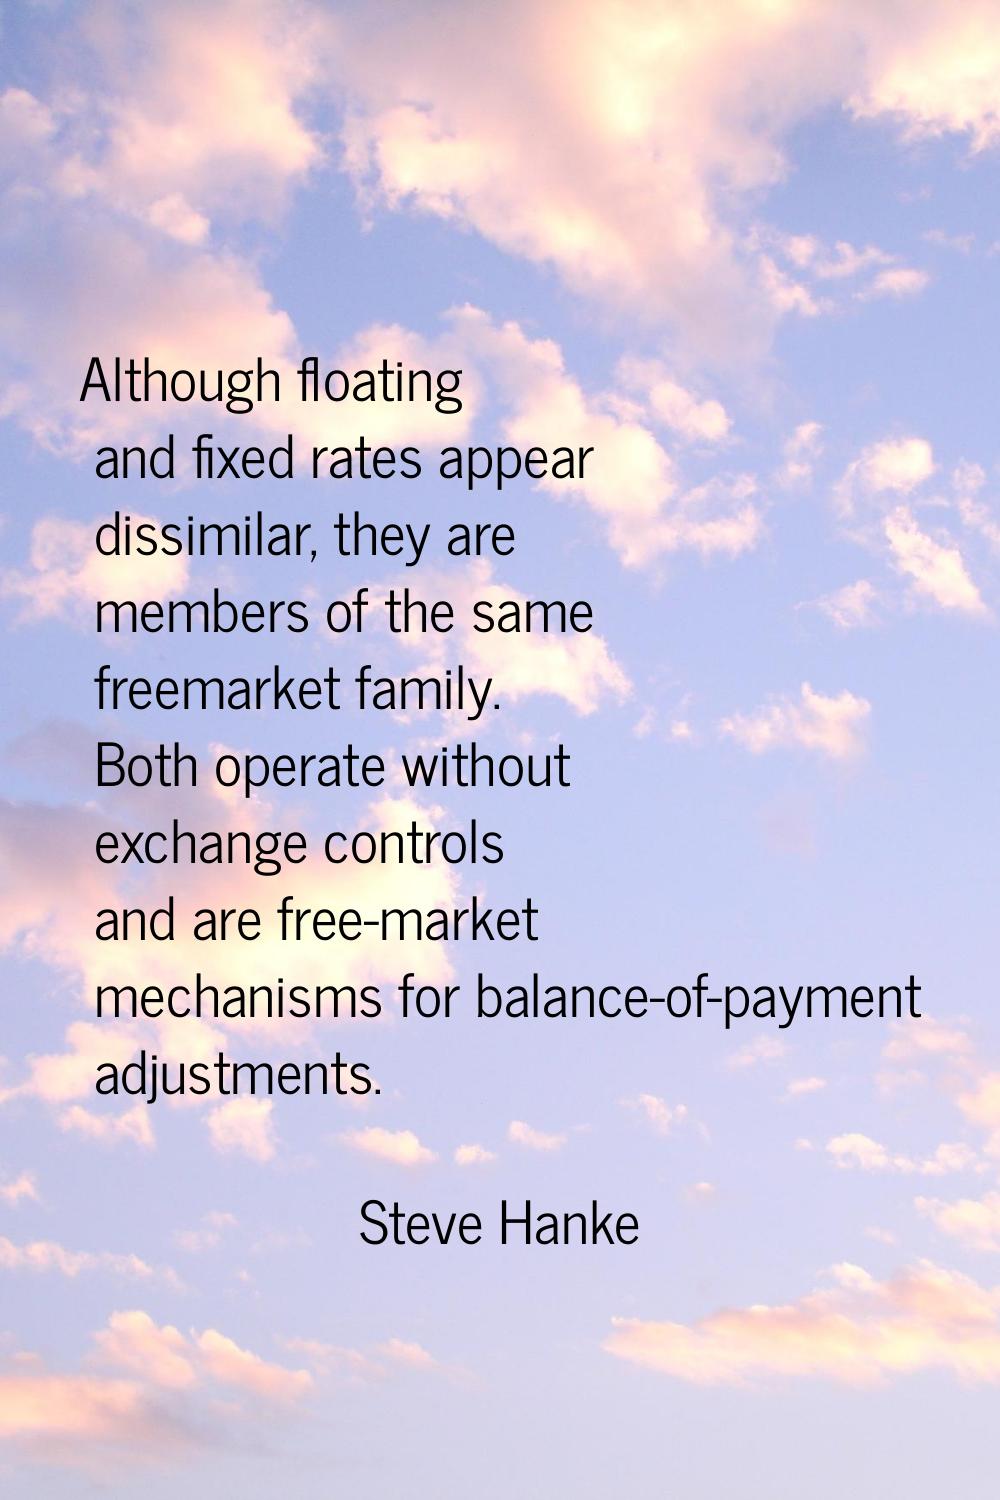 Although floating and fixed rates appear dissimilar, they are members of the same freemarket family